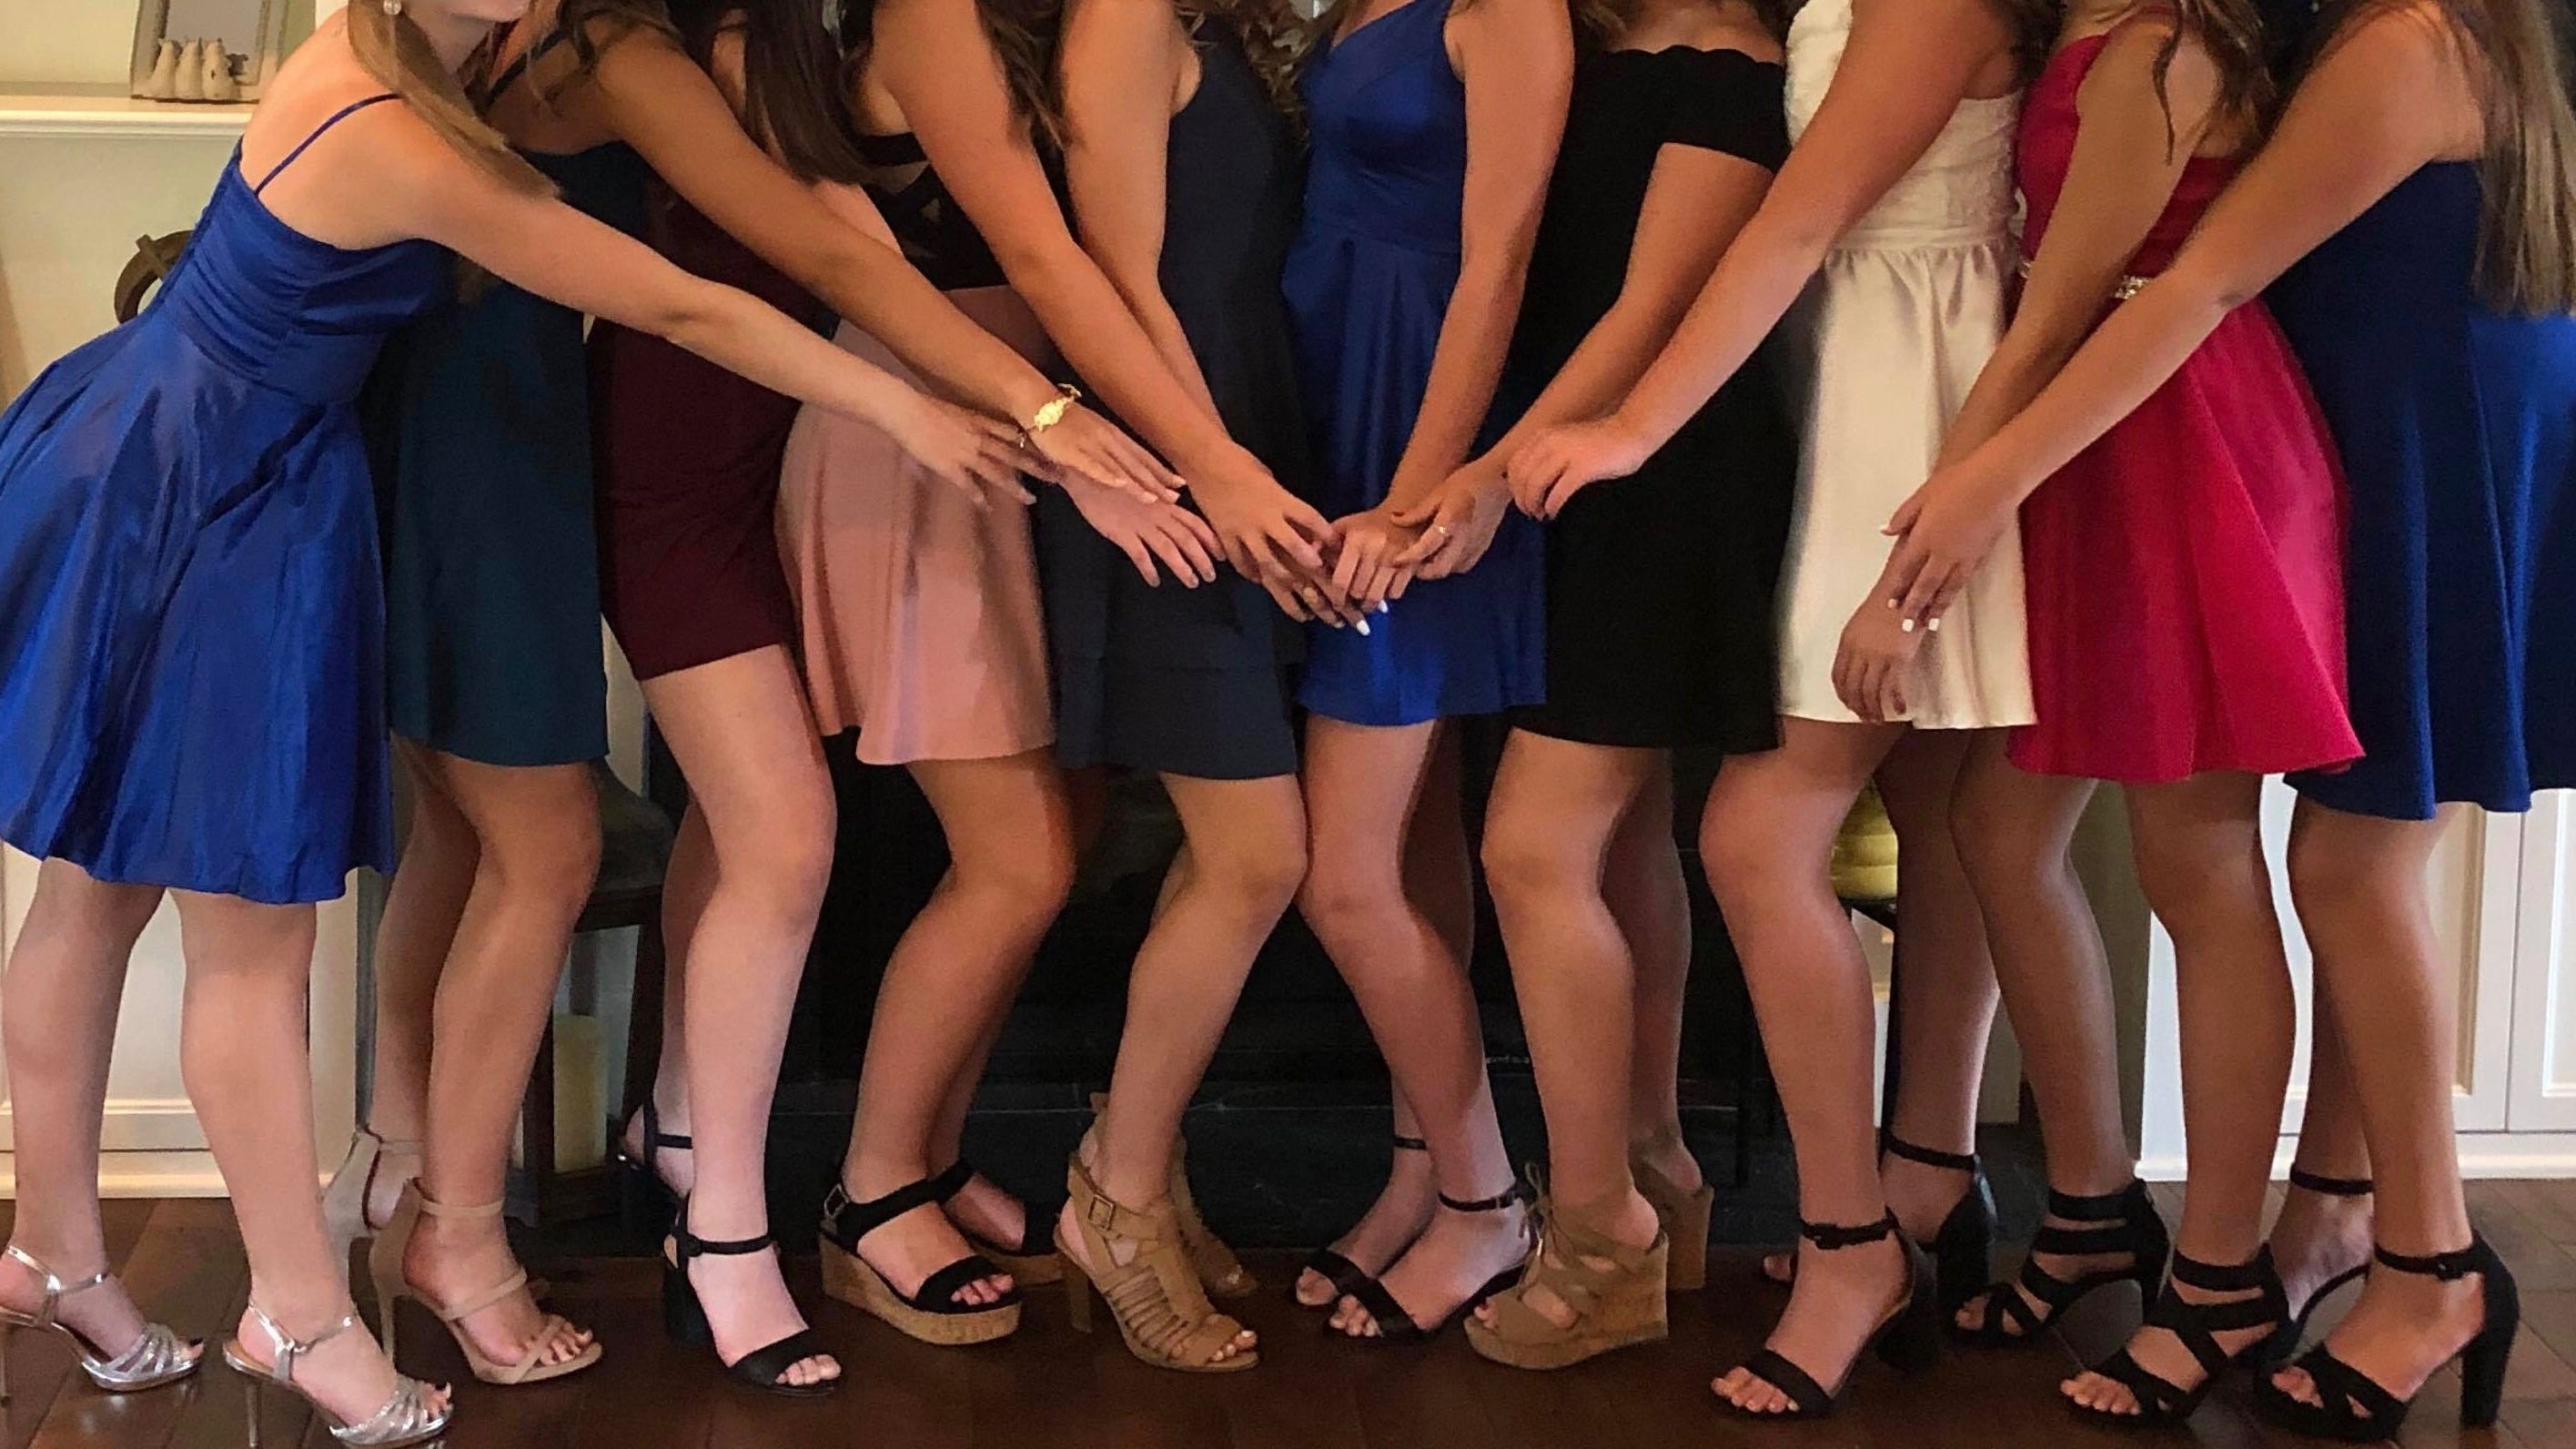 Eastern High School Homecoming 2019 Raises Concerns Over Dress Code